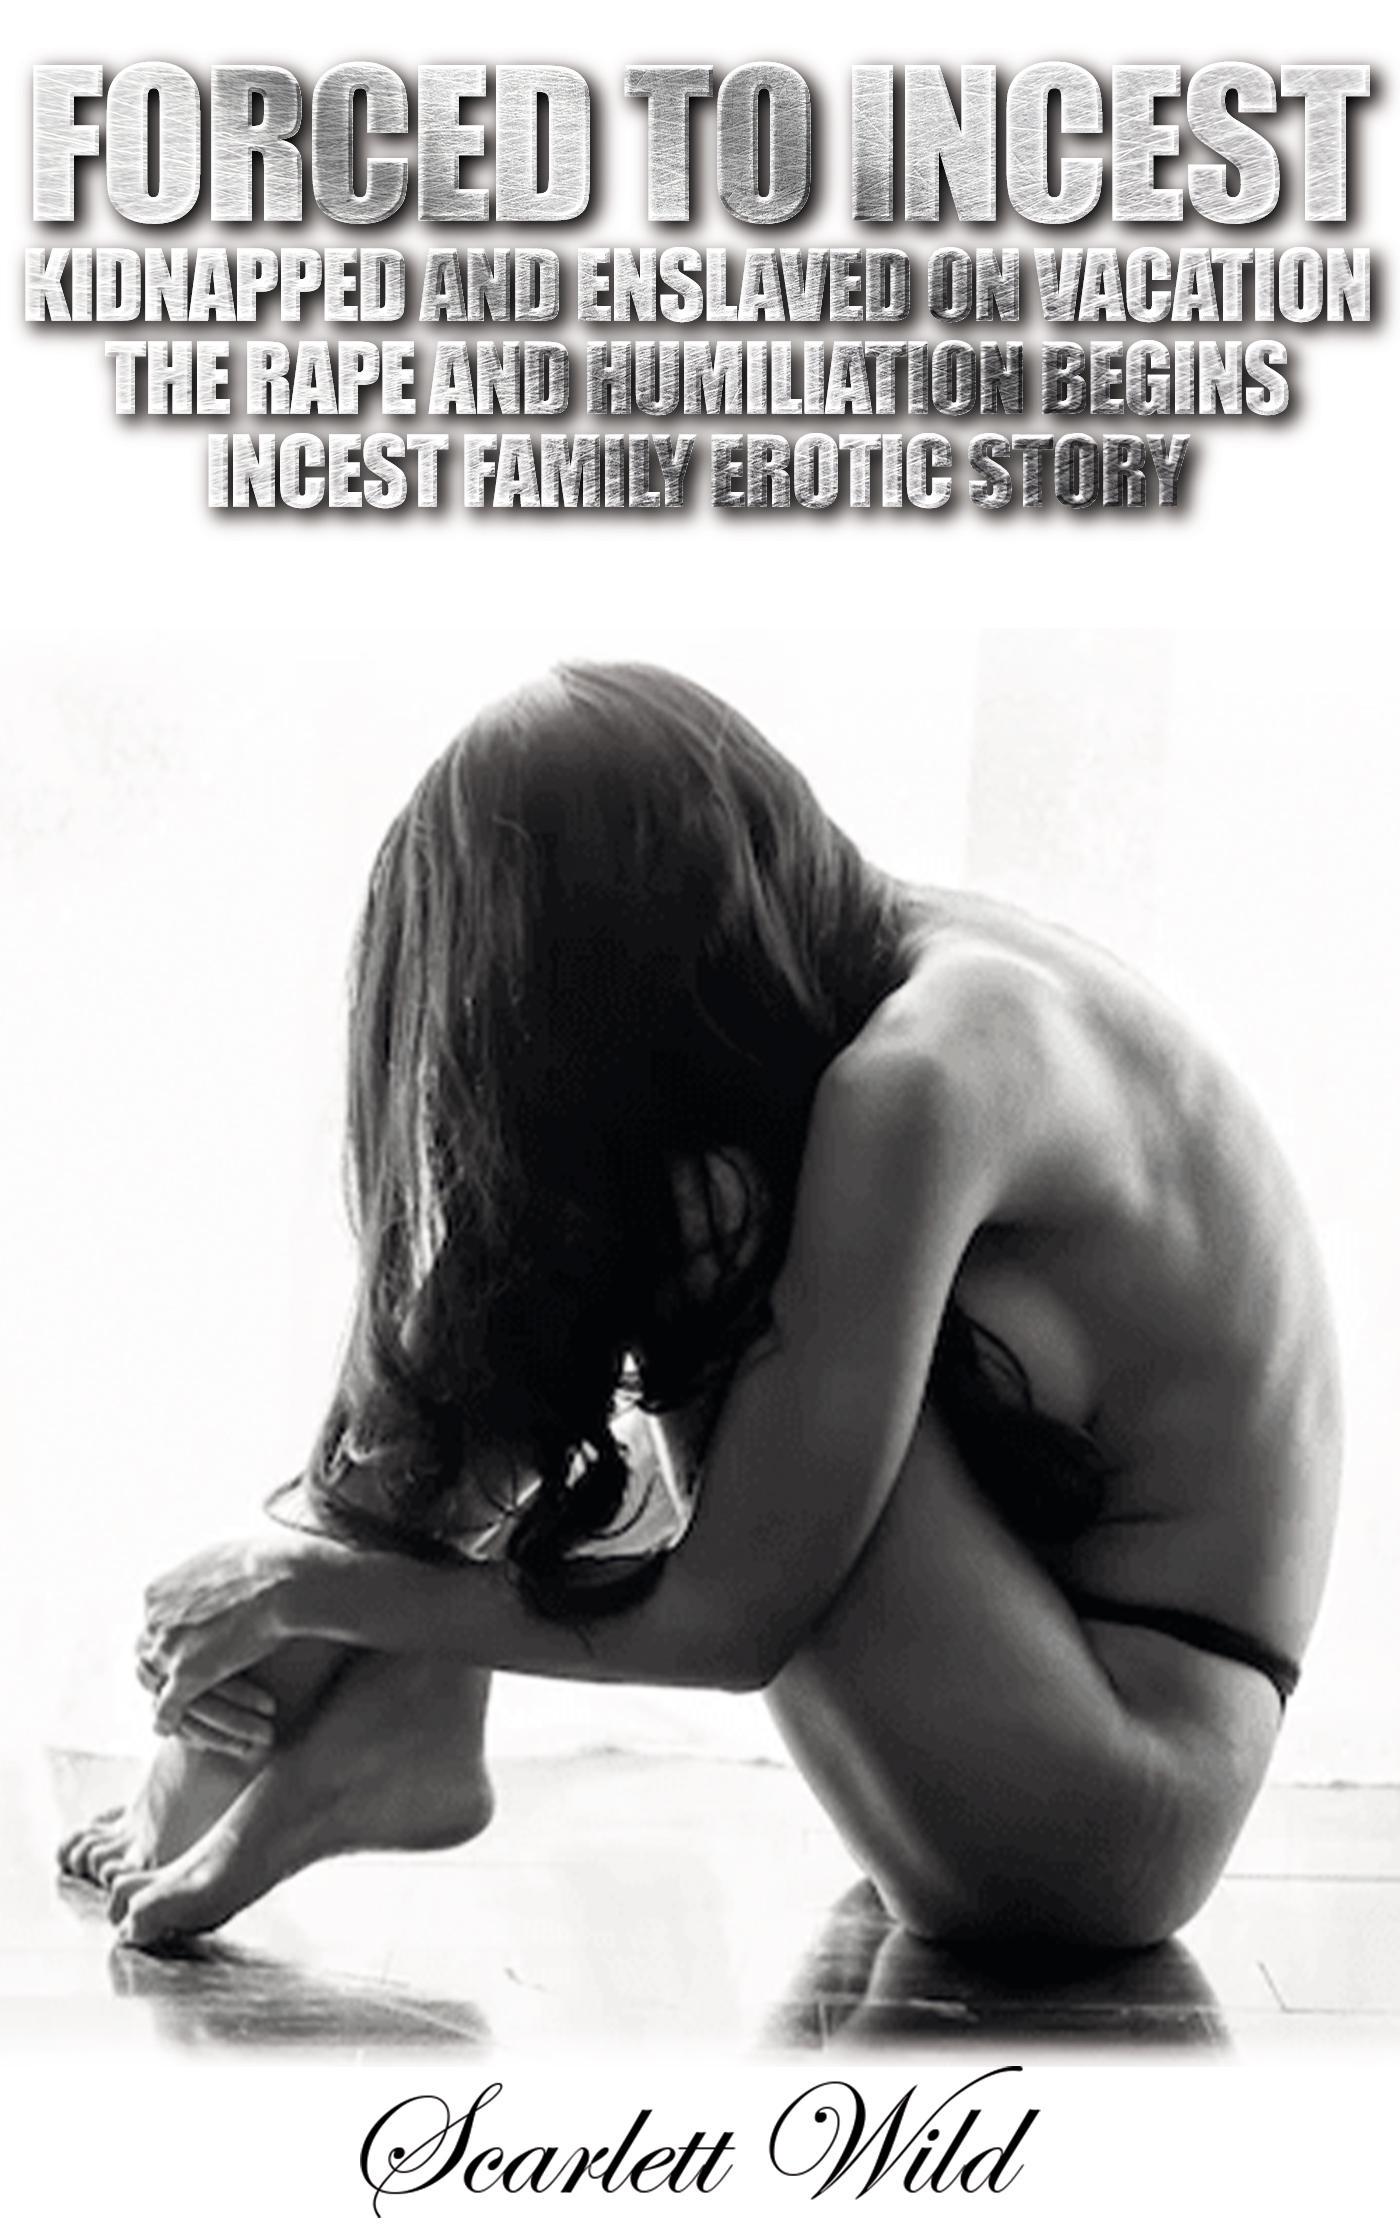 Incest Family Erotic Story – a book